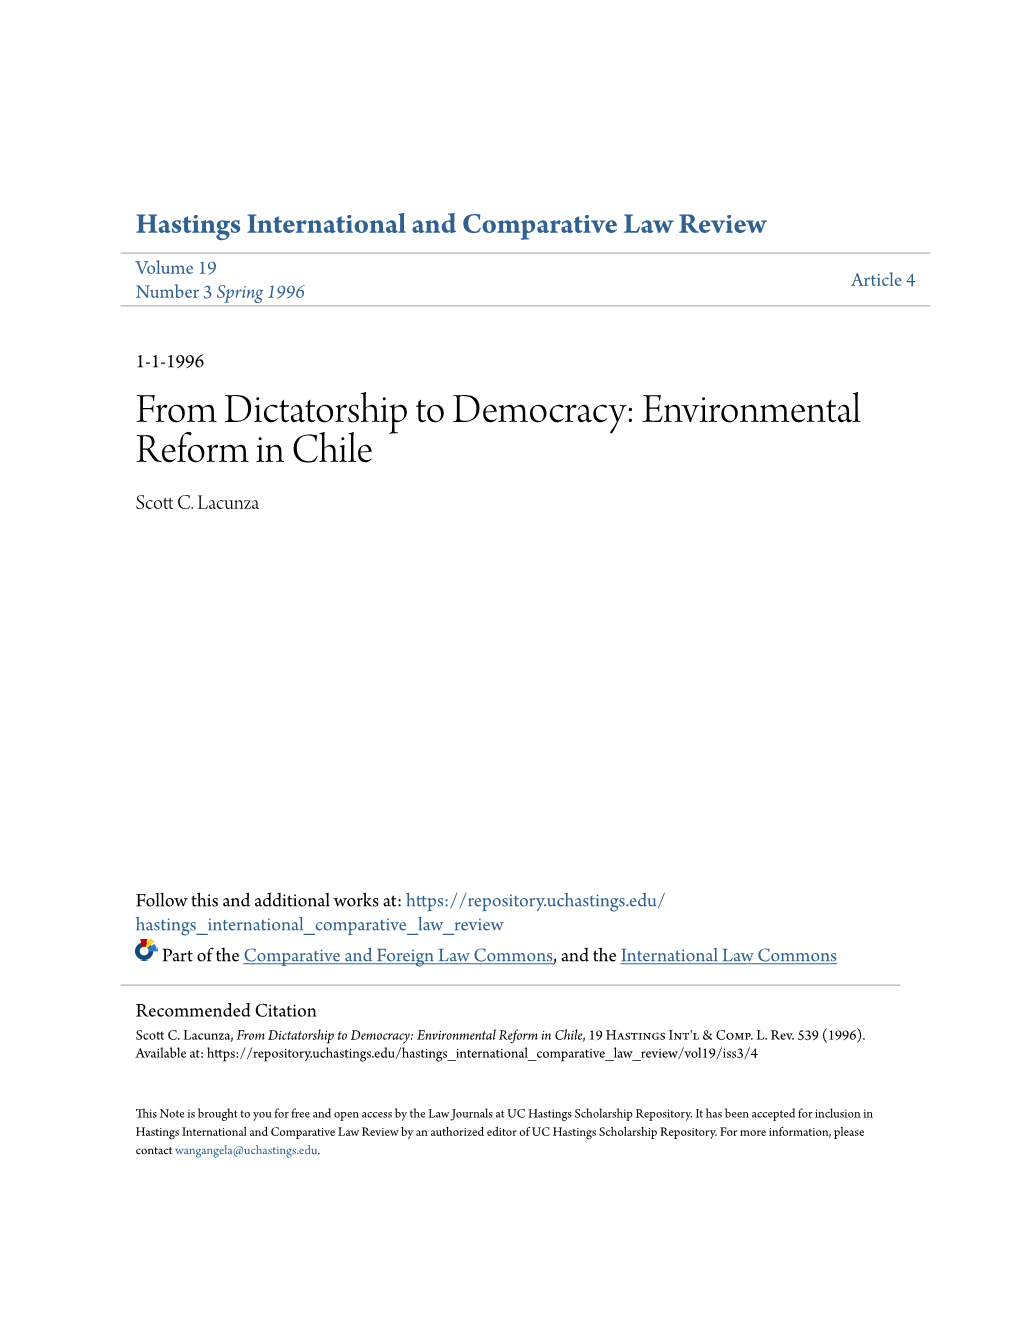 From Dictatorship to Democracy: Environmental Reform in Chile Scott .C Lacunza